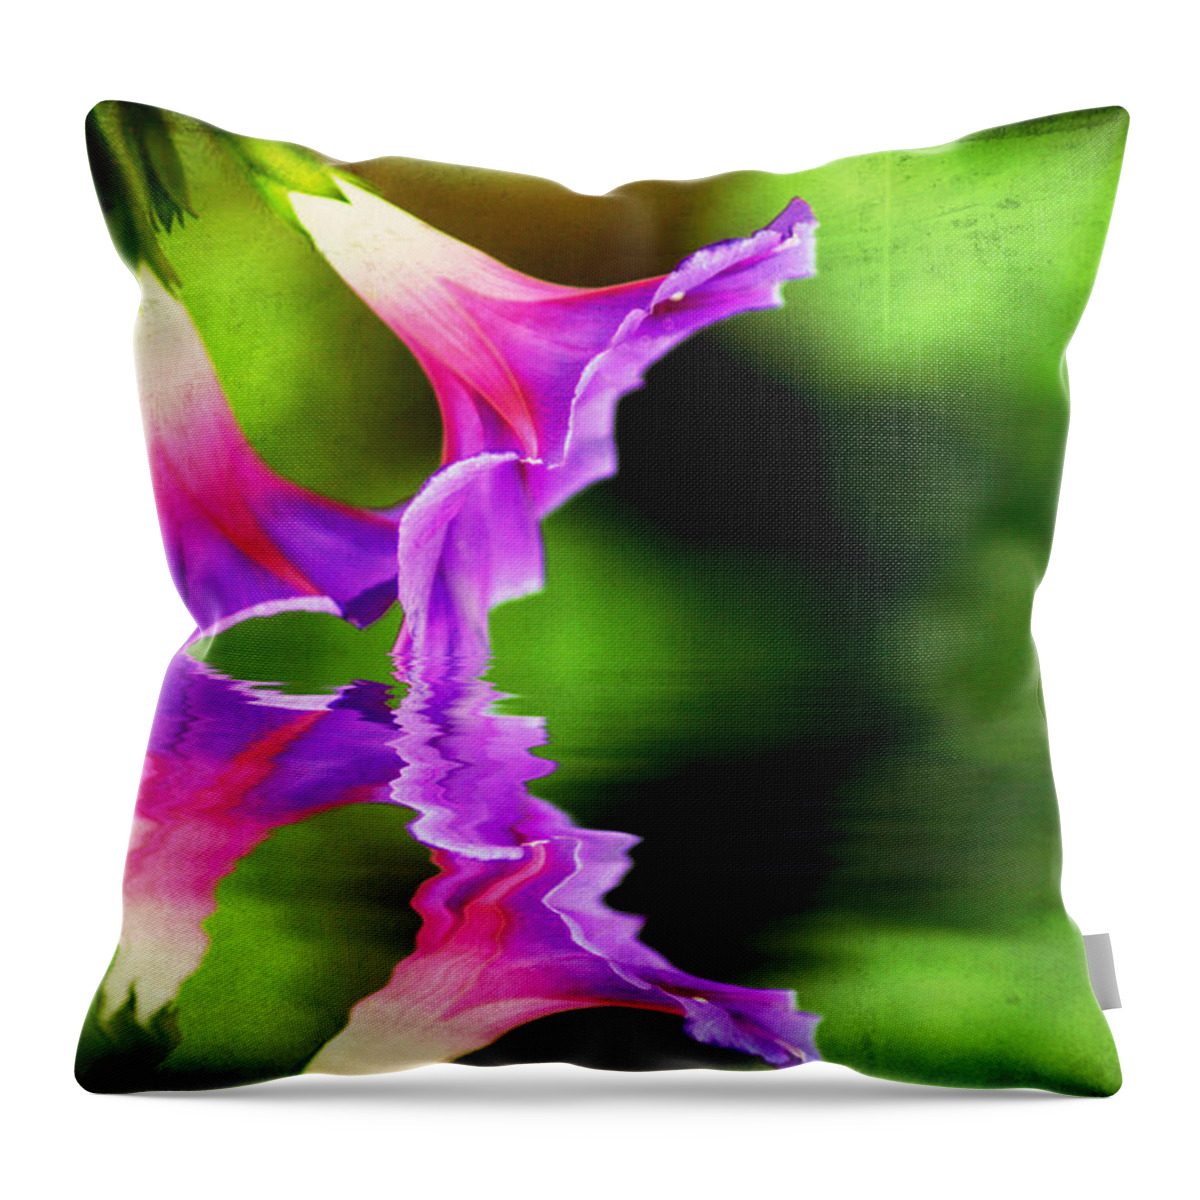  Bloom Throw Pillow featuring the photograph Glory Reflection by Darren Fisher